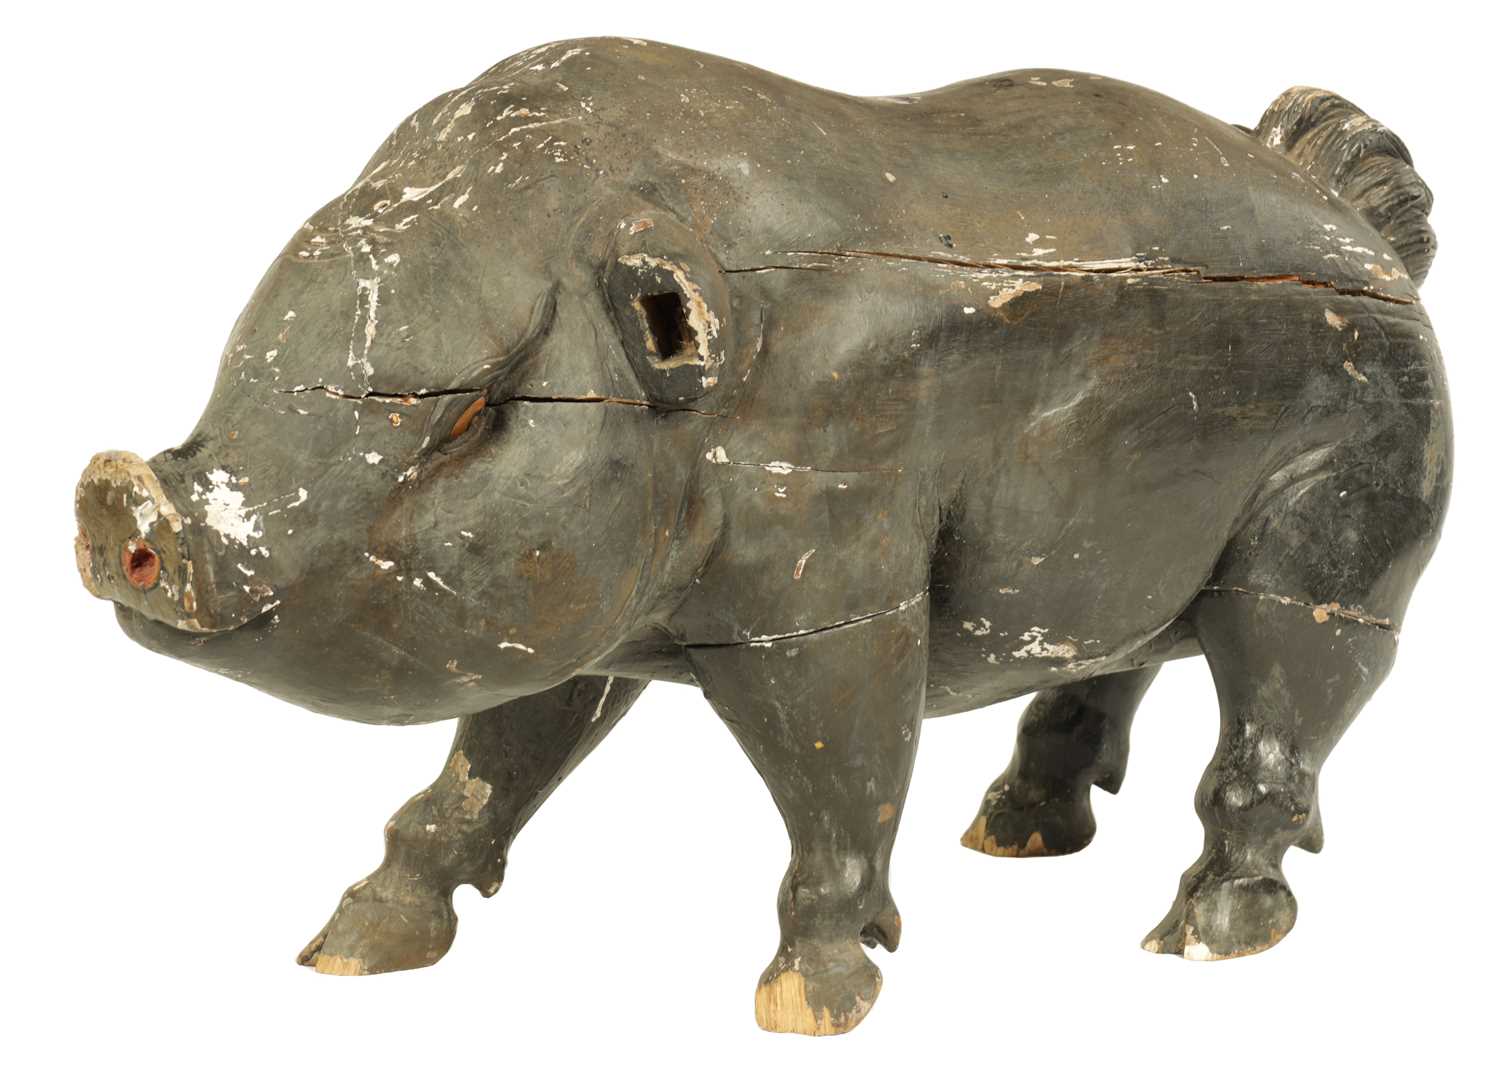 Lot 592 - AN EARLY 19TH CENTURY CARVED WOOD BUTCHERS SHOP ADVERTISING DISPLAY DEPICTING A POT-BELLIED PIG.